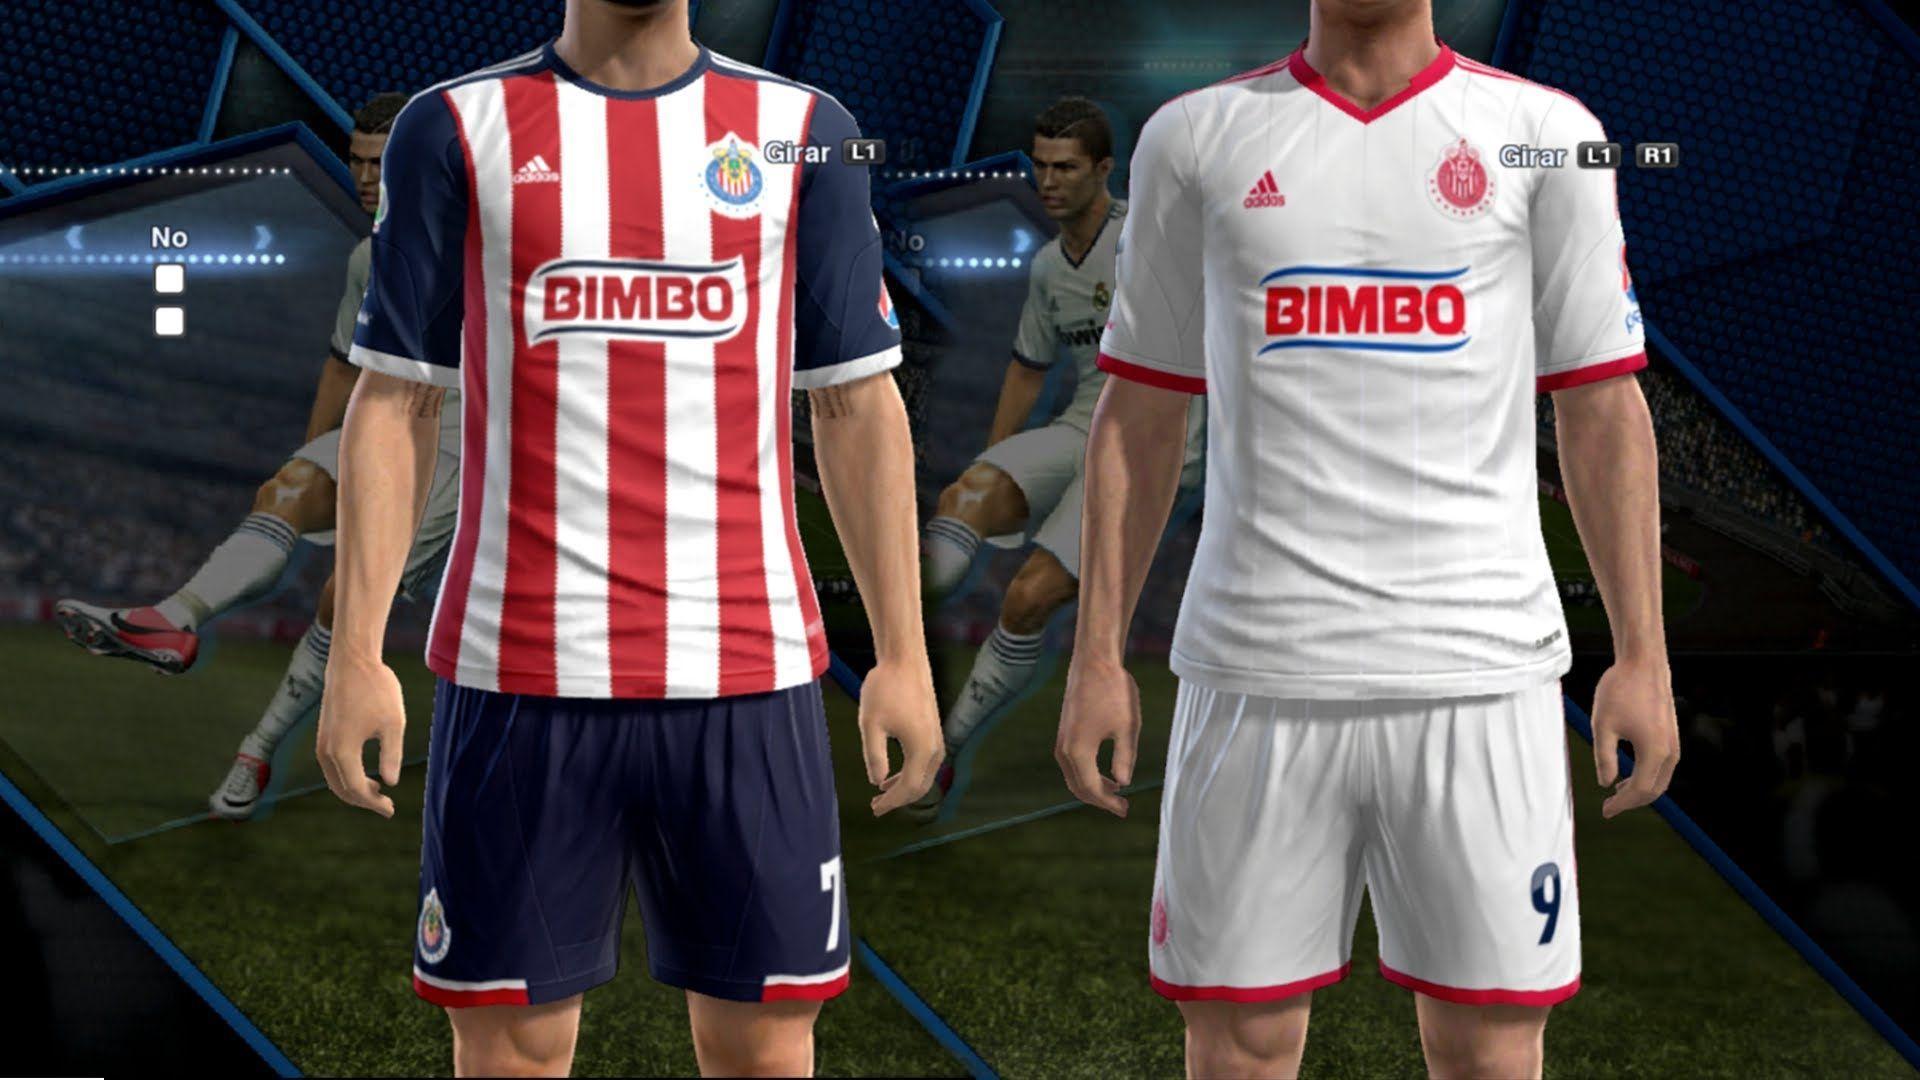 Download Pes 2015 Paraguay Kits Local Copa America Kits. Leaked